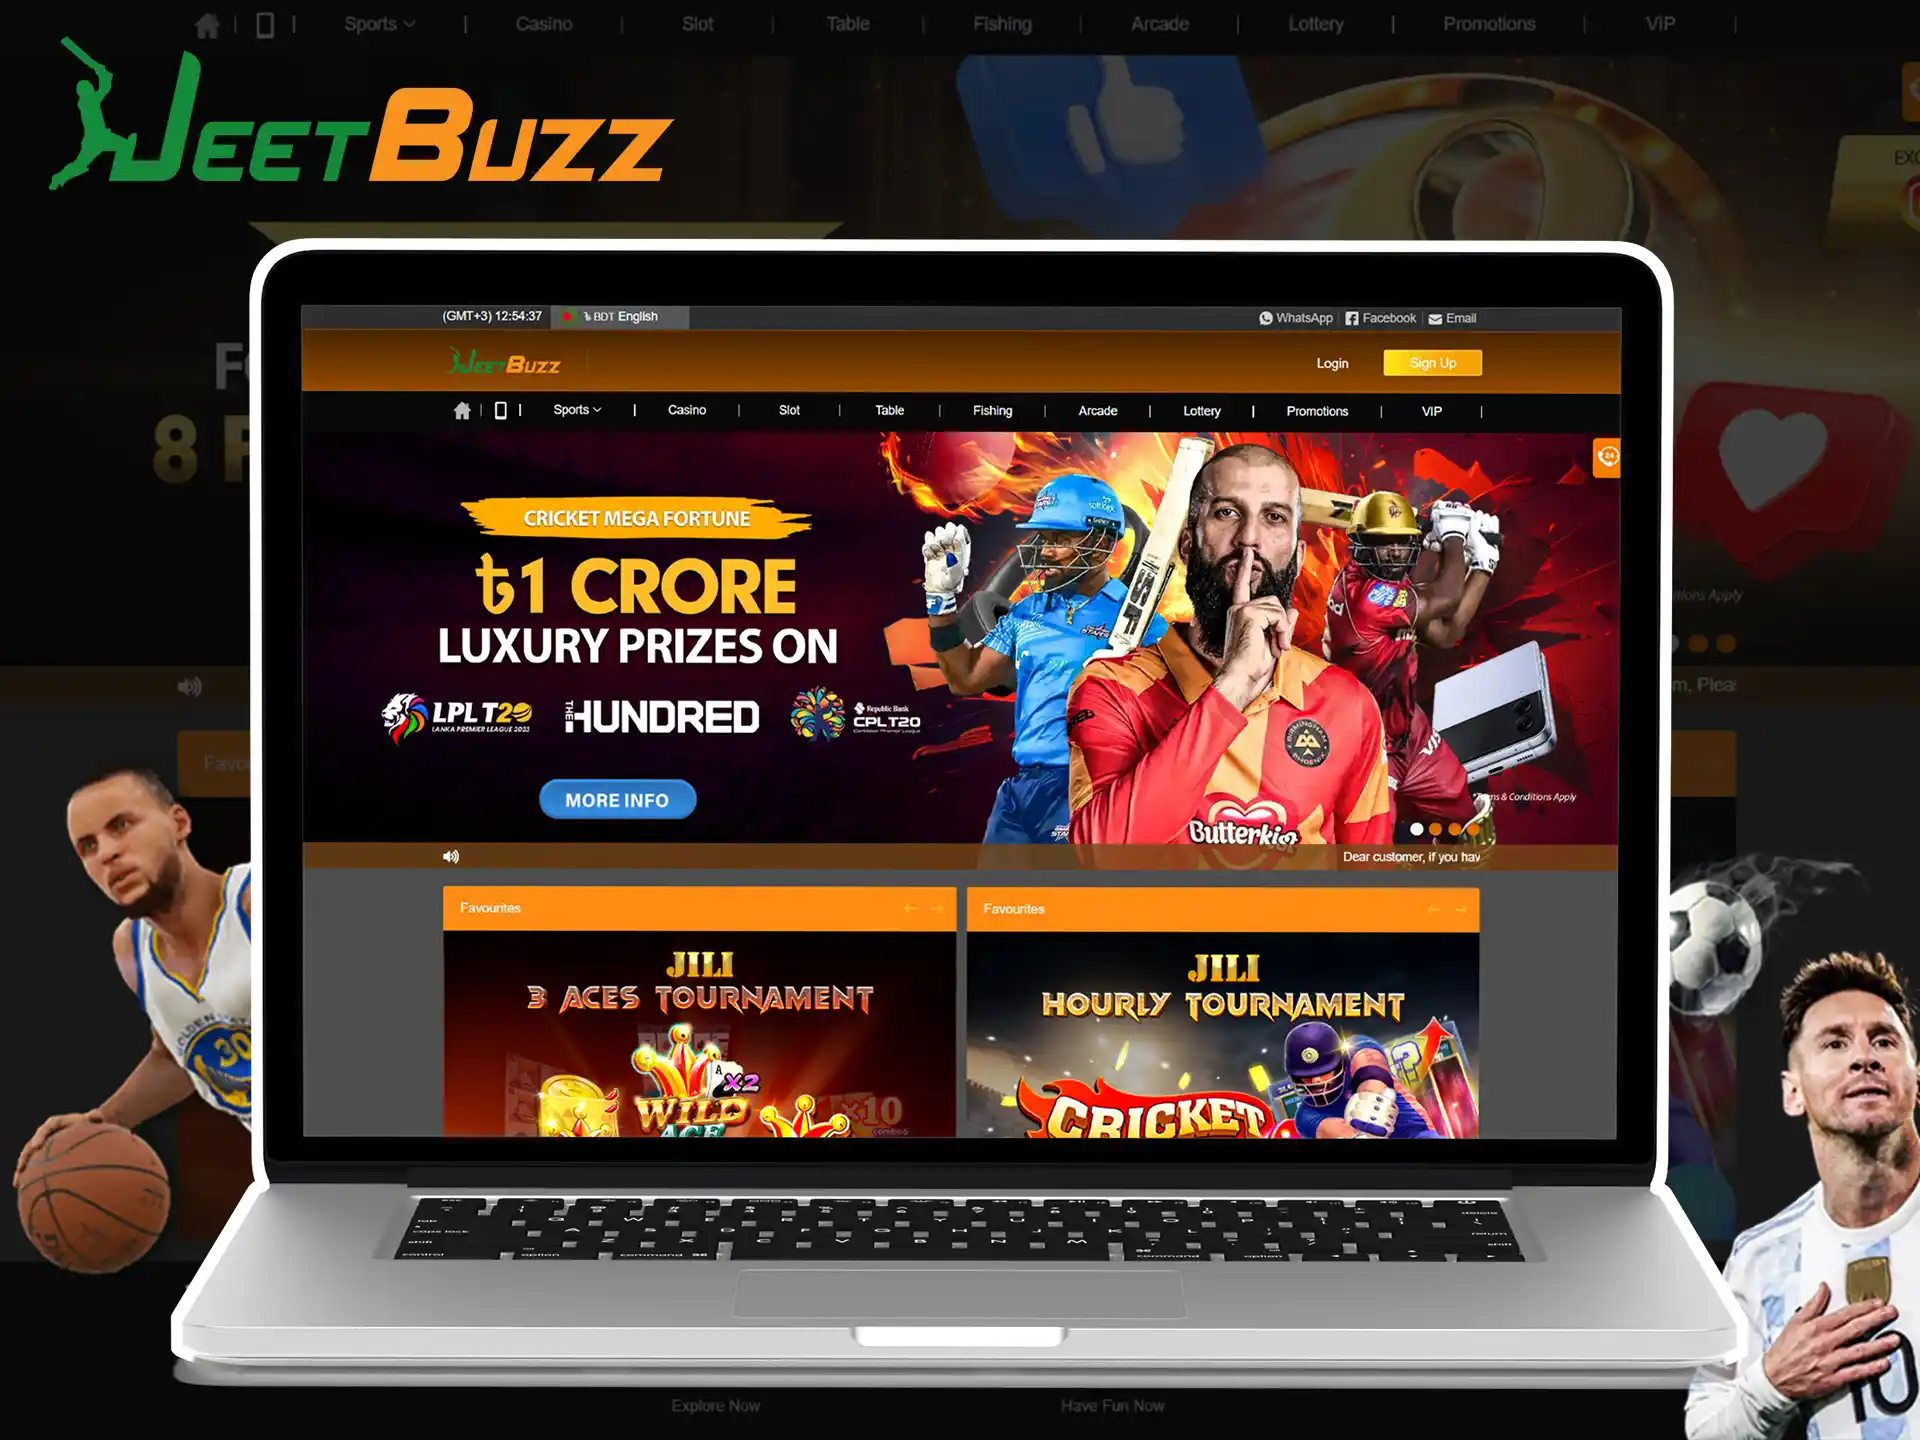 Visit official JeetBuzz website and play online casino games.